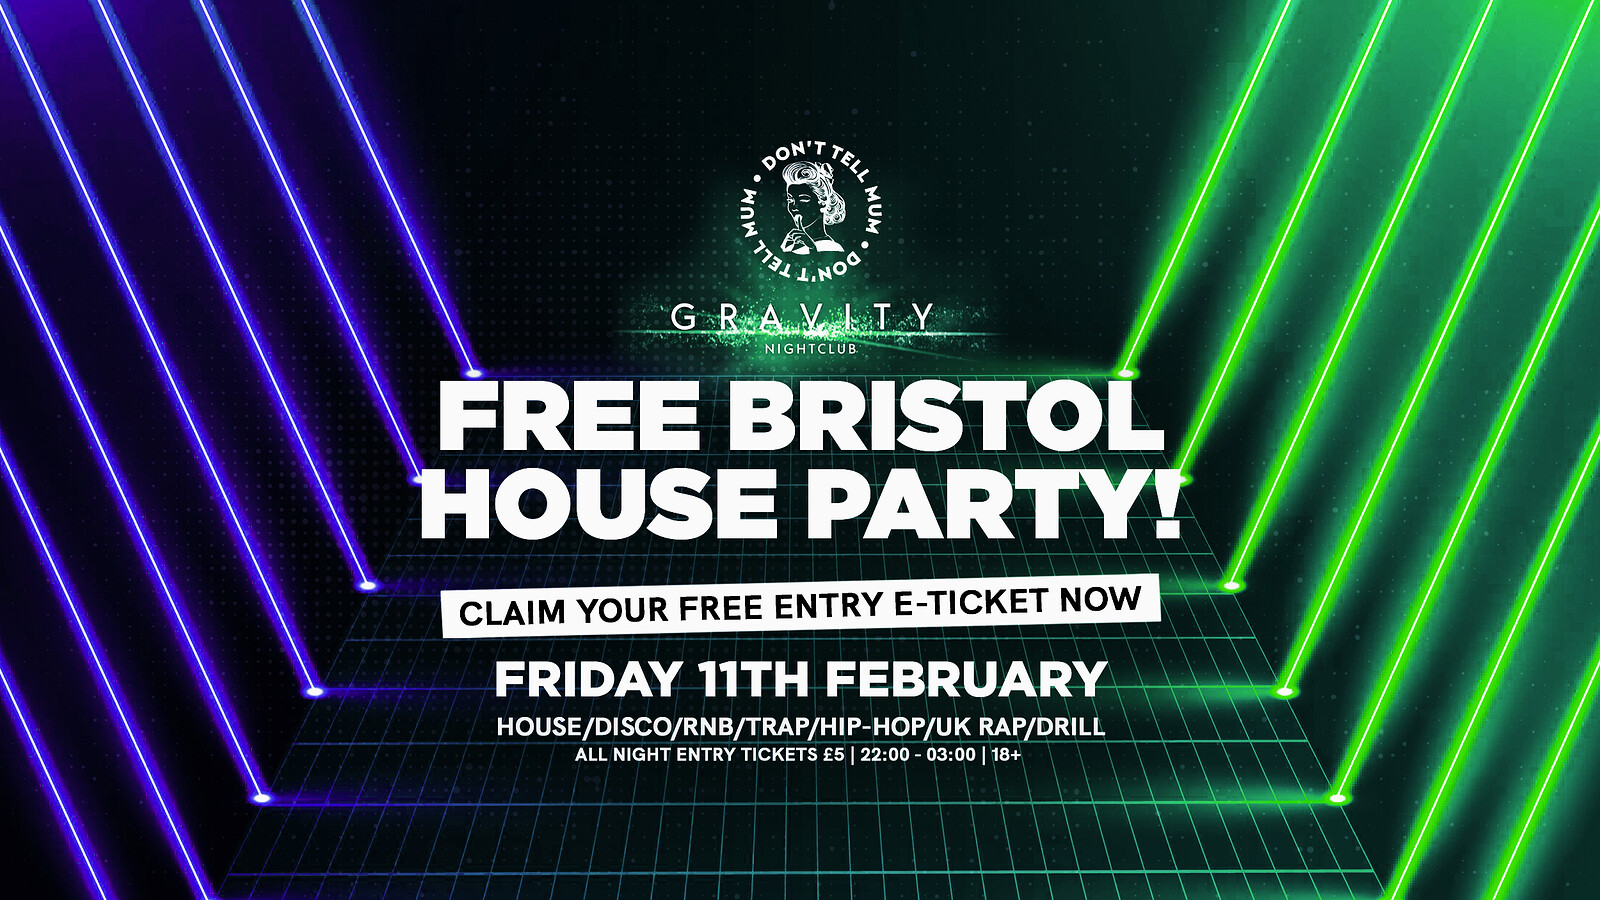 Don't Tell Mum • FREE ENTRY Bristol House Party at Gravity